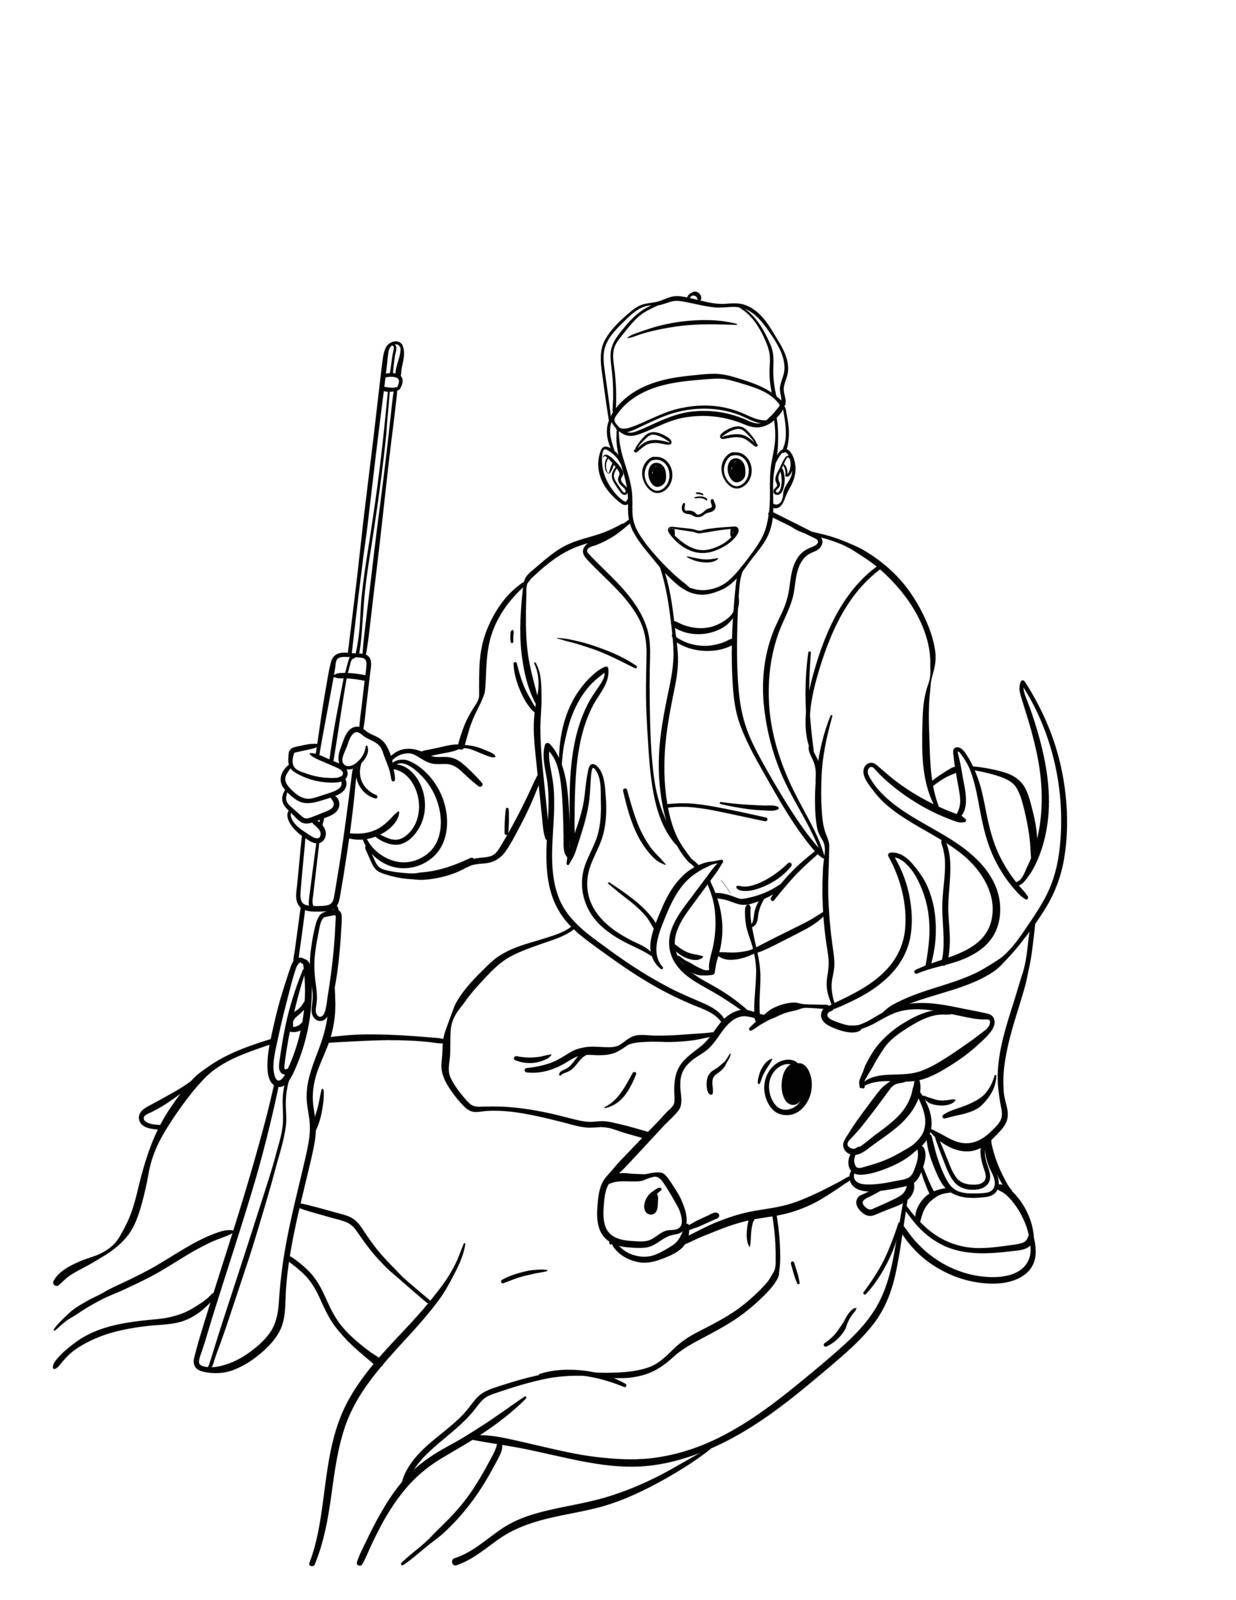 A cute and funny coloring page of Deer Hunting. Provides hours of coloring fun for children. Color, this page is very easy. Suitable for little kids and toddlers.